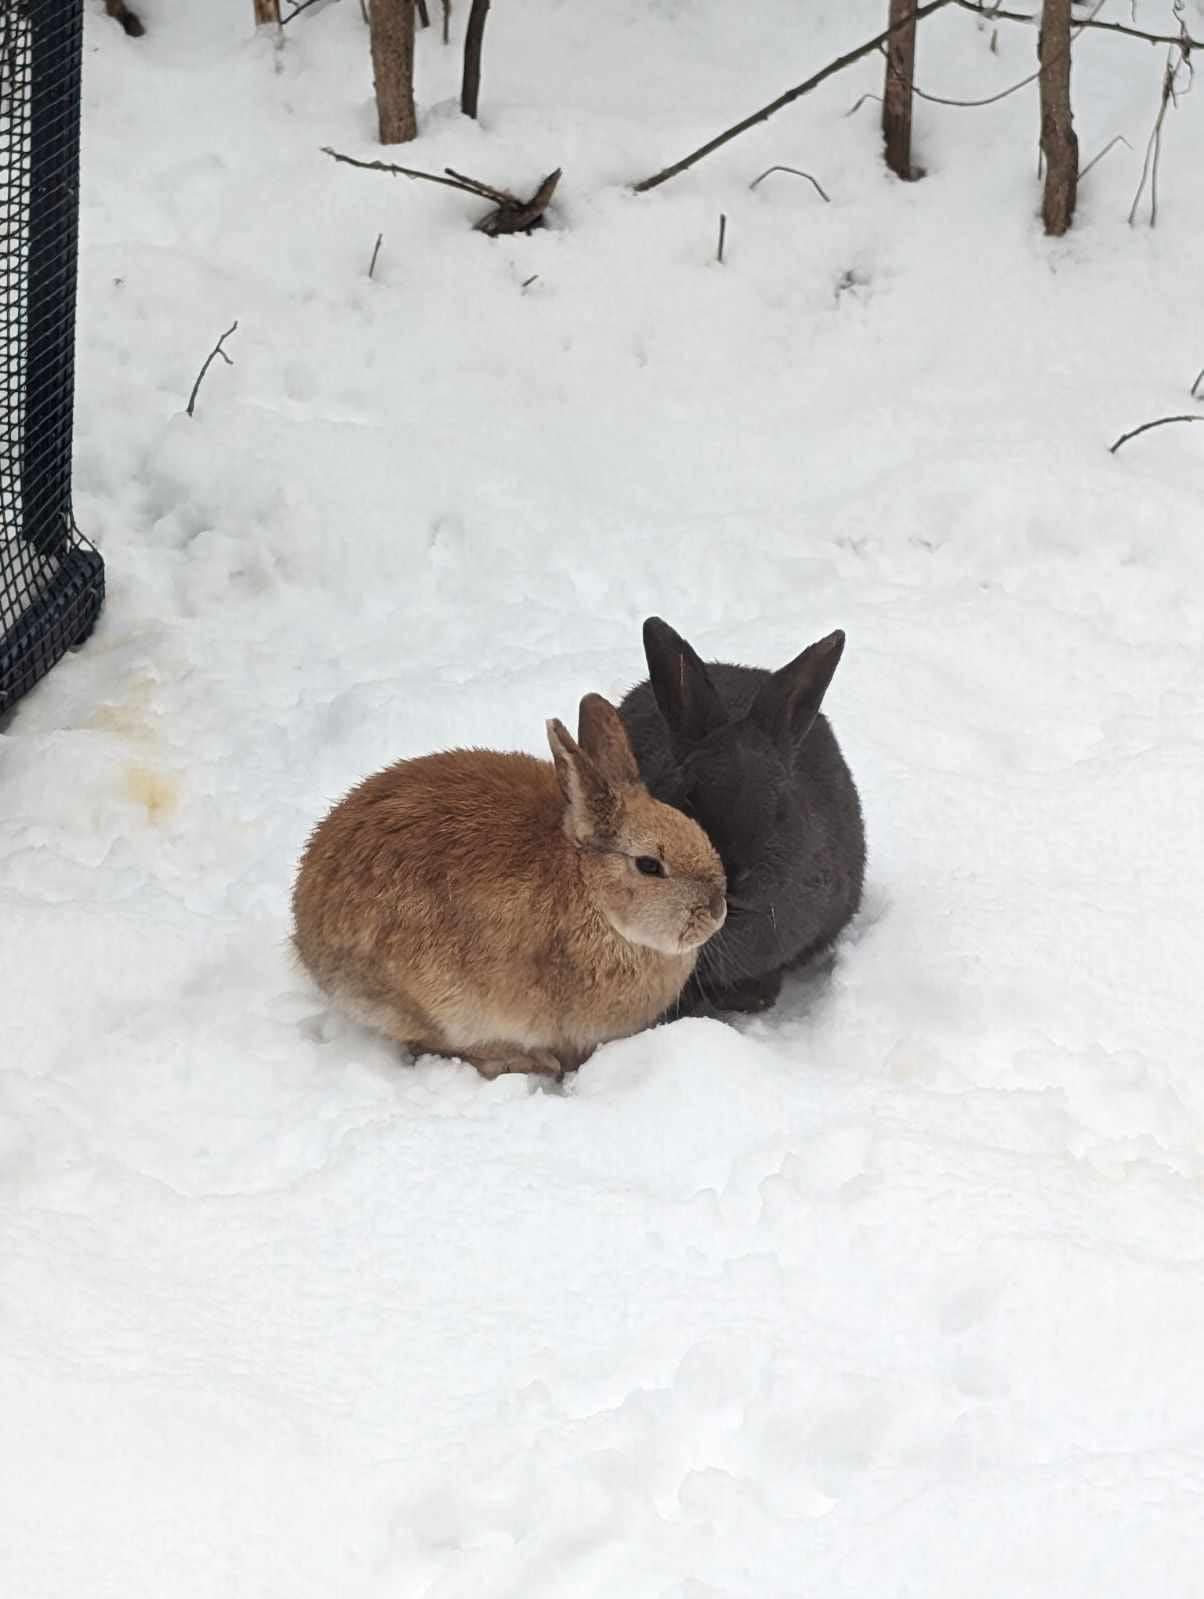 Melanie Andrecyk and some of her neighbours in Stellarton, N.S., say they have caught eight bunnies. (Melanie Andrecyk/Facebook - image credit)